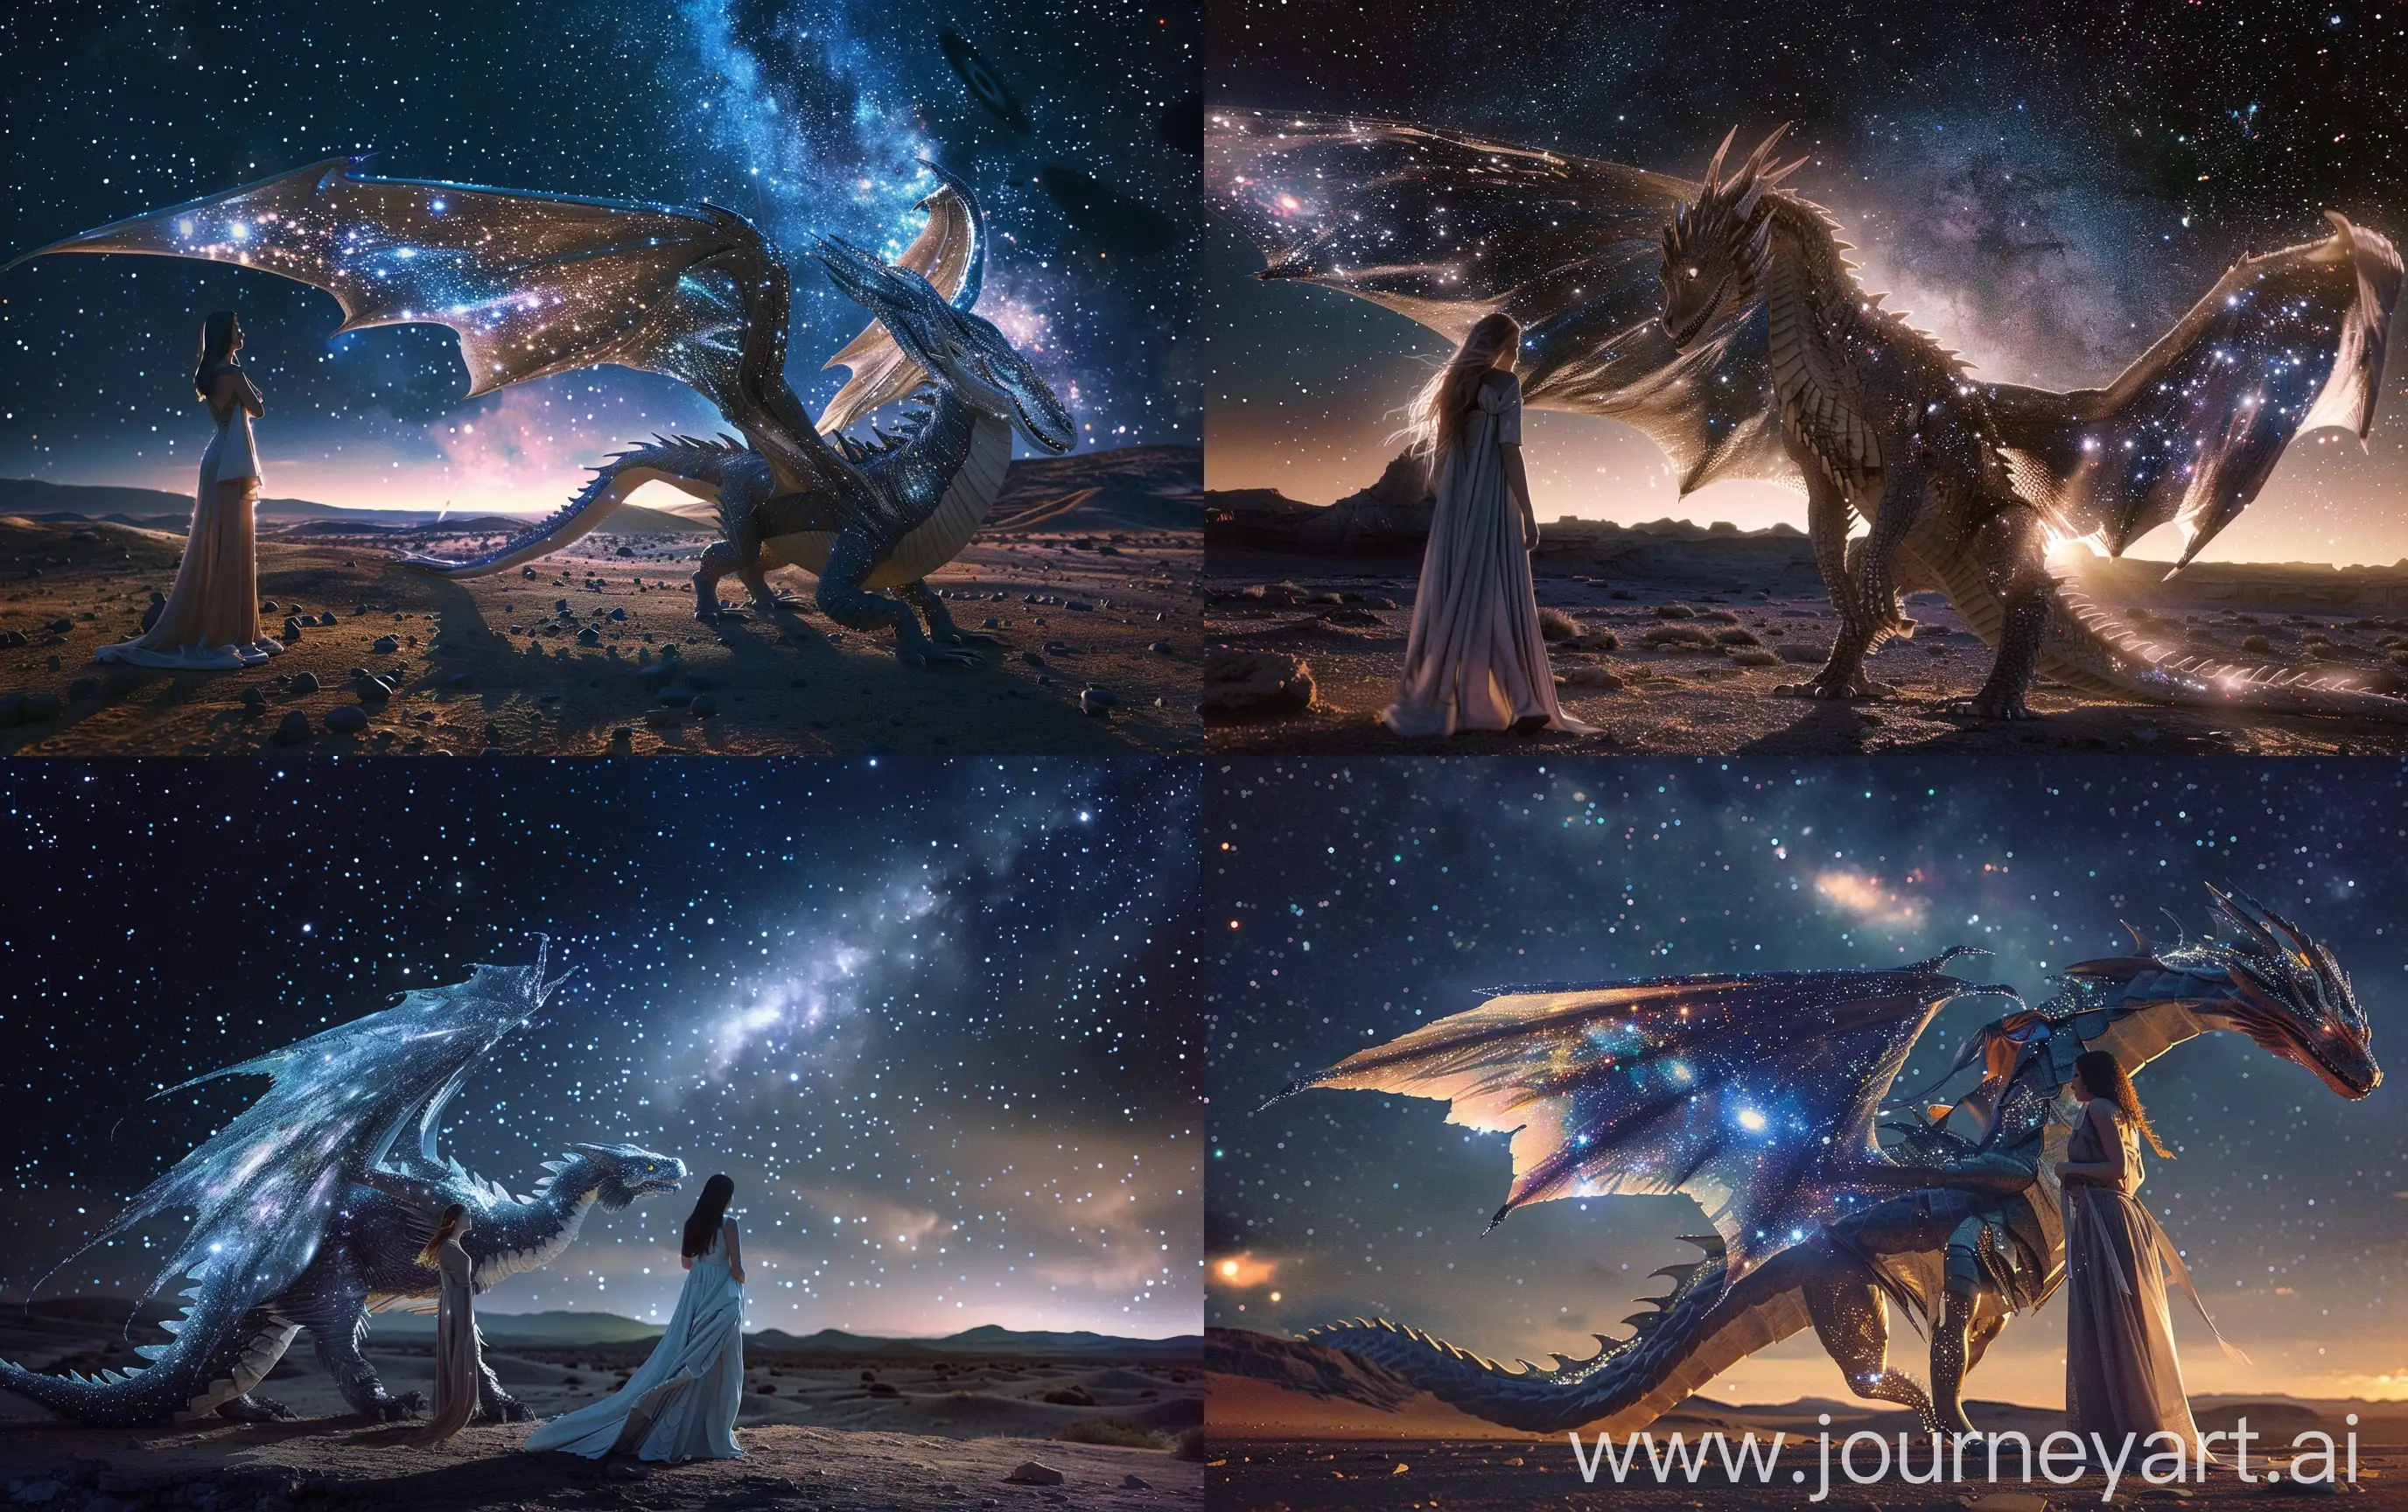 The big winged space dragon stands on ground, wings are made of shining galaxies and stars, beautiful female in long dress looks at the dragon, the night dark desert with small hills, in the sky is deep space with bright nebulas, realistic, Kodak 35mm shot --ar 16:10